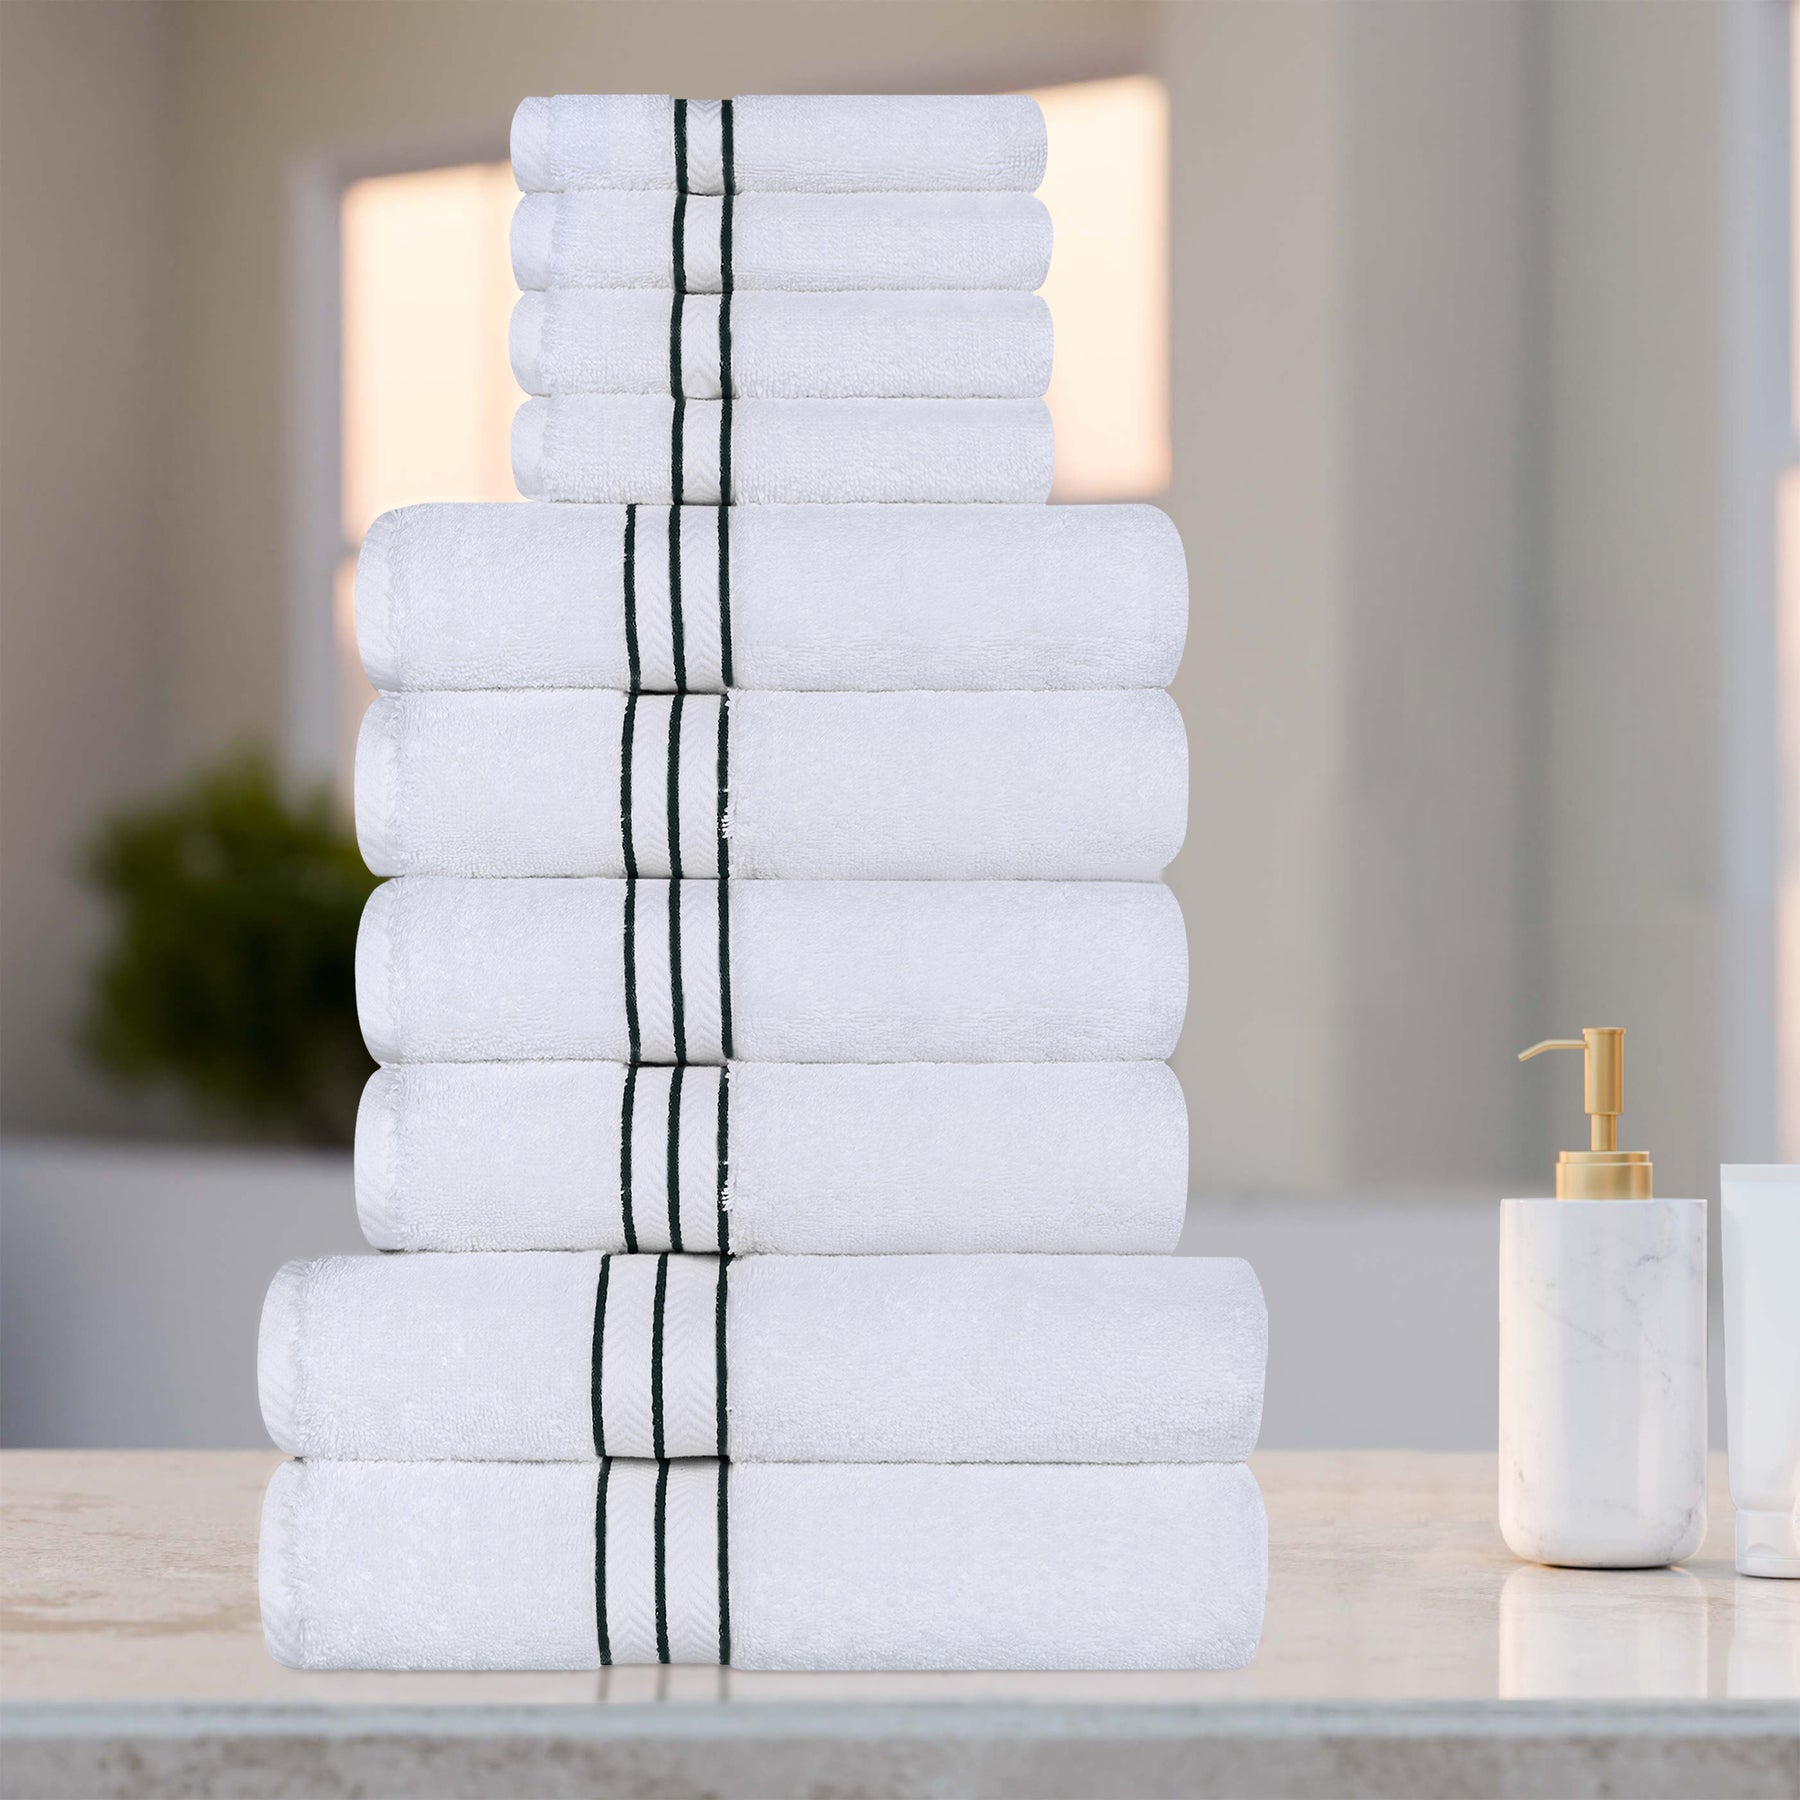 Ultra-Plush Turkish Cotton Hotel Collection Super Absorbent Solid Luxury Bathroom Set - Teal